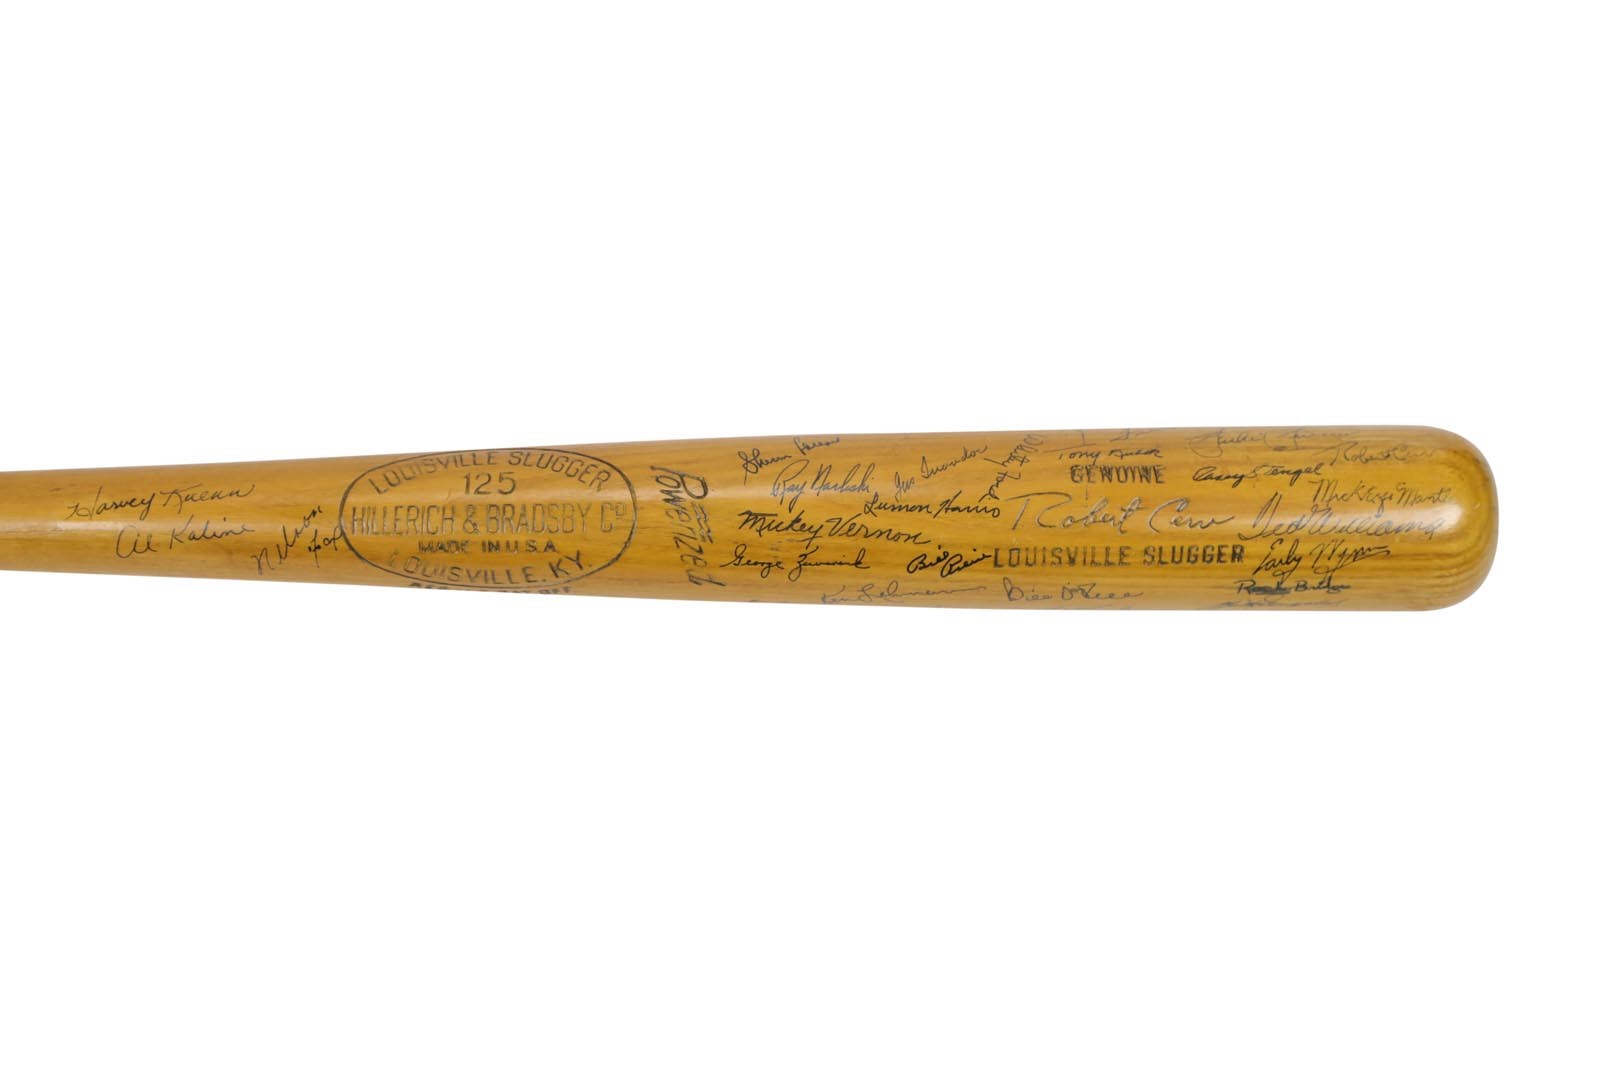 - 1958 American League All Star Signed Bat from Mickey Mantles Roomate Bob Cerv (PSA)